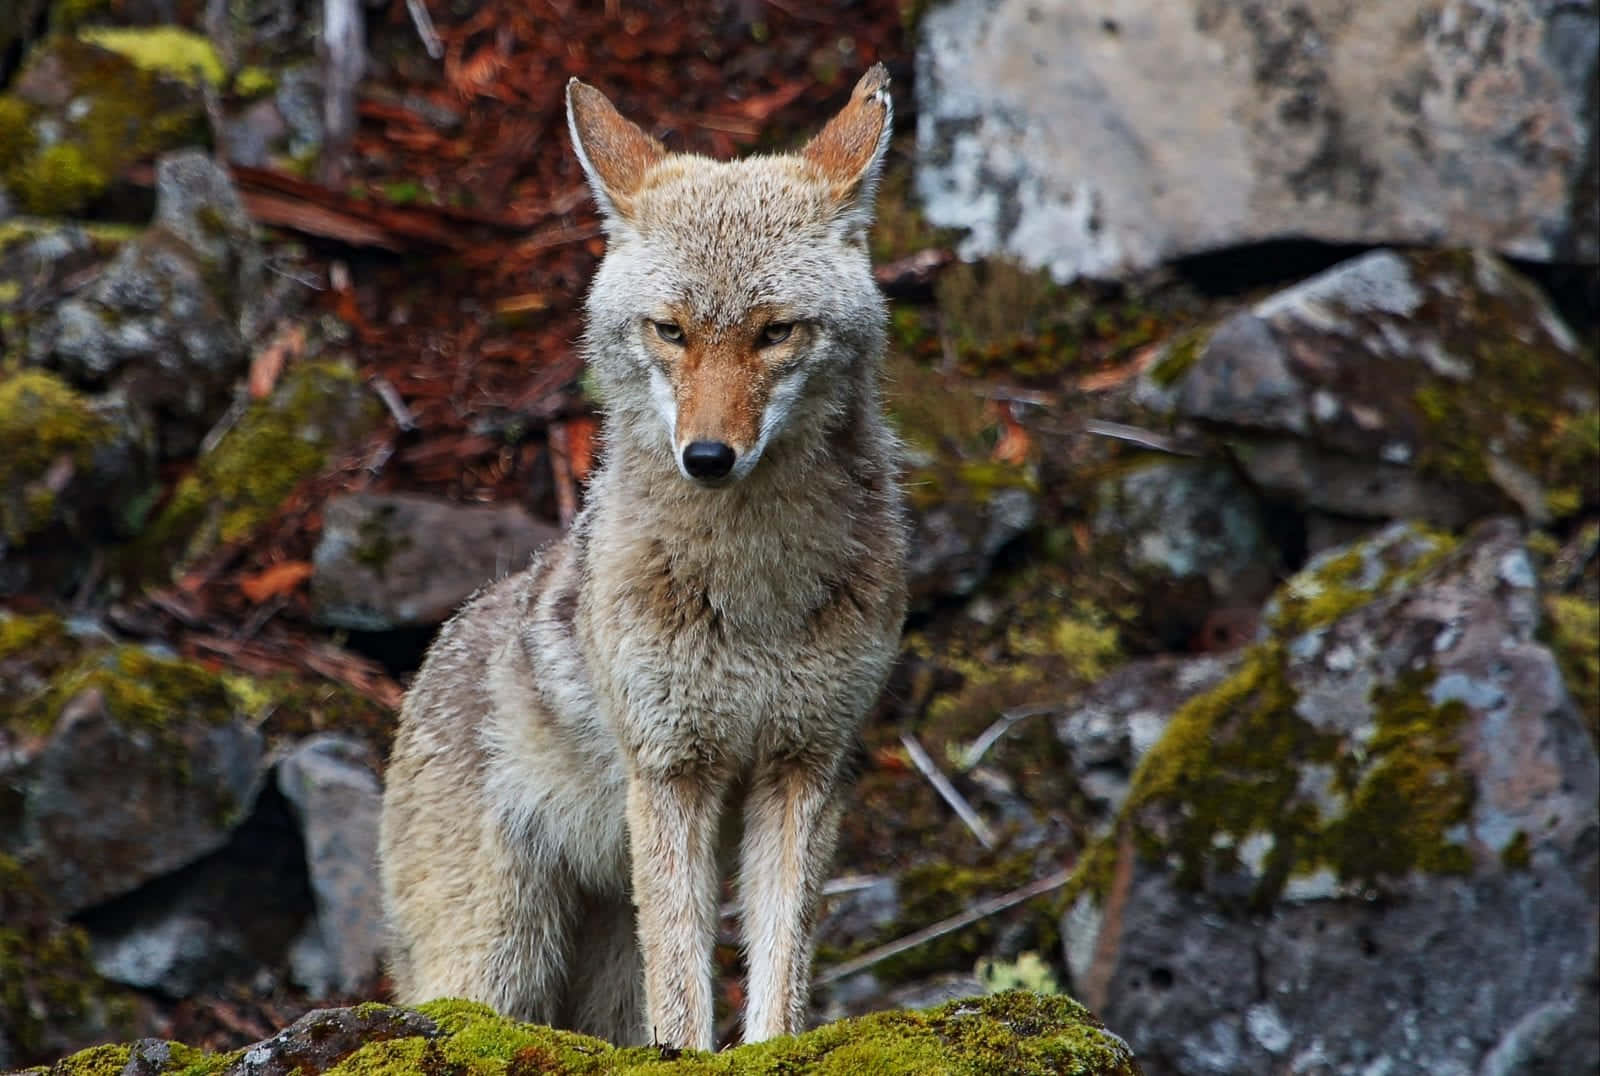 Marvel at the coyote, a beloved animal in North America